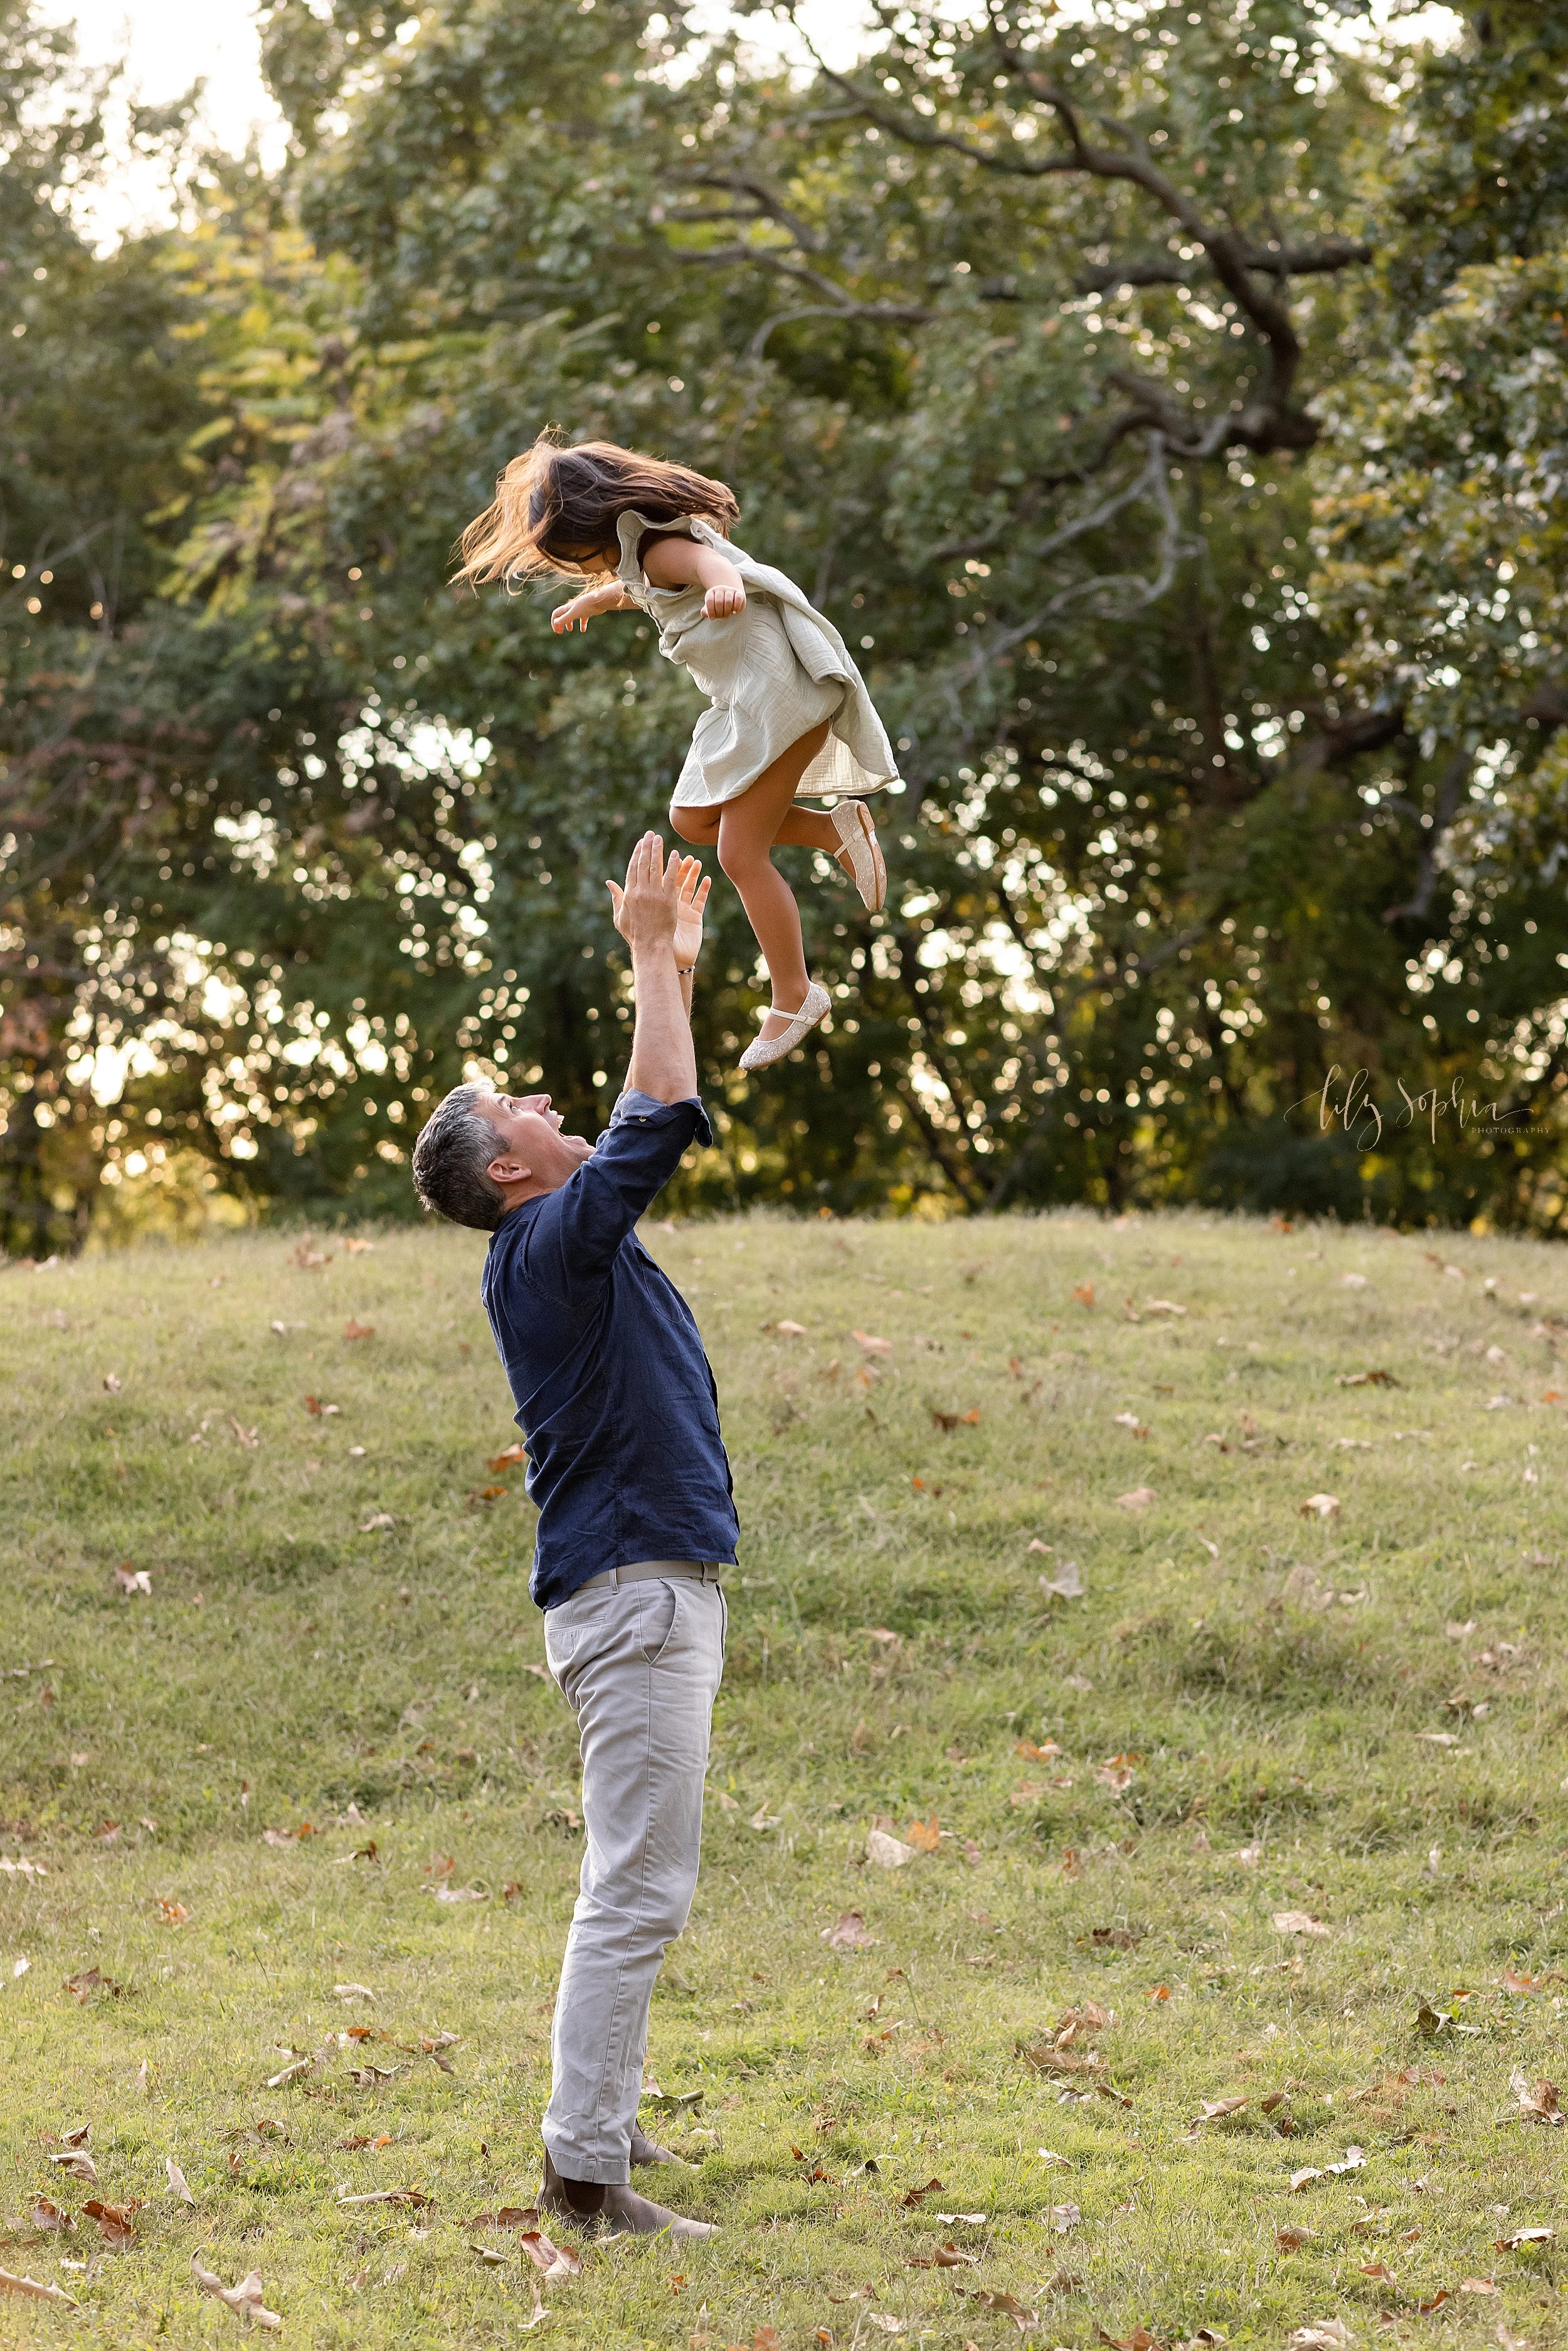  Fun family photo memory of a father throwing his young daughter in the air above his head as she flies at sunset in a park in Atlanta during autumn. 